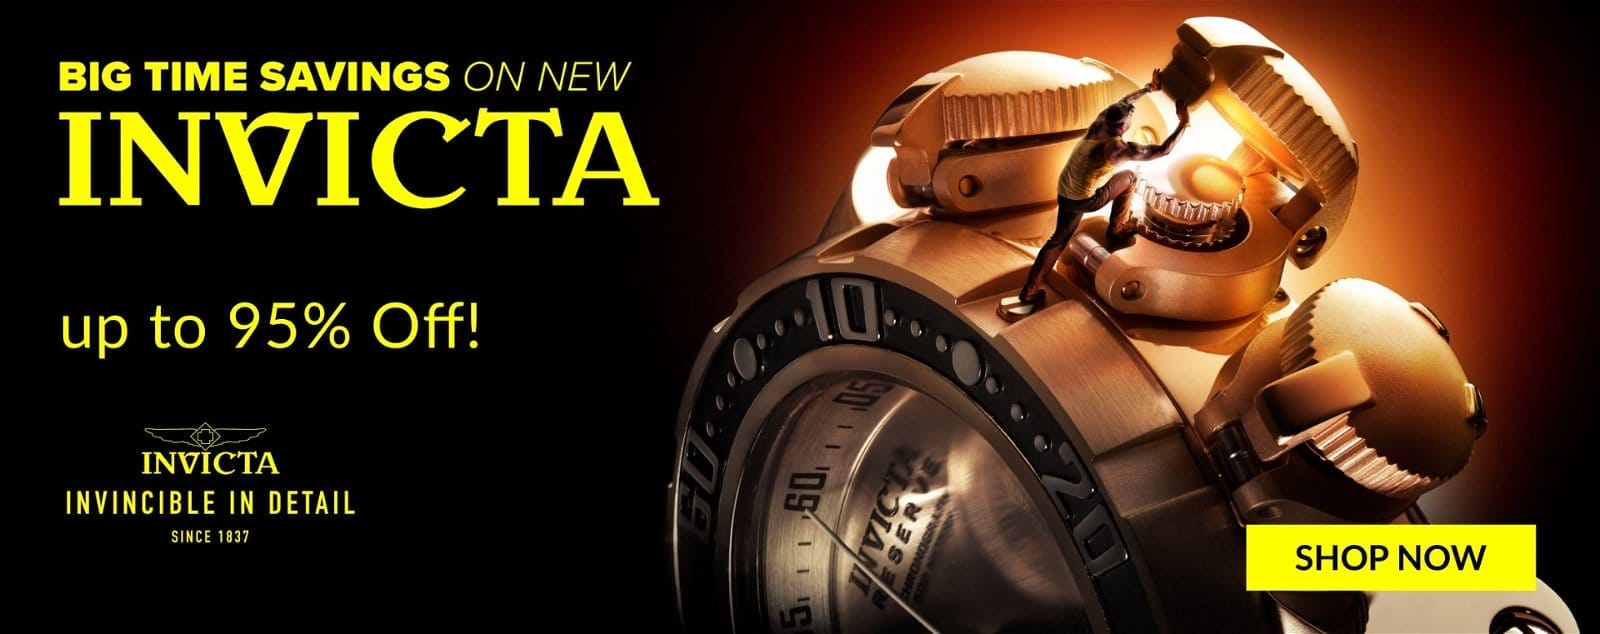 Invicta Watches on Sale up to 95% Off